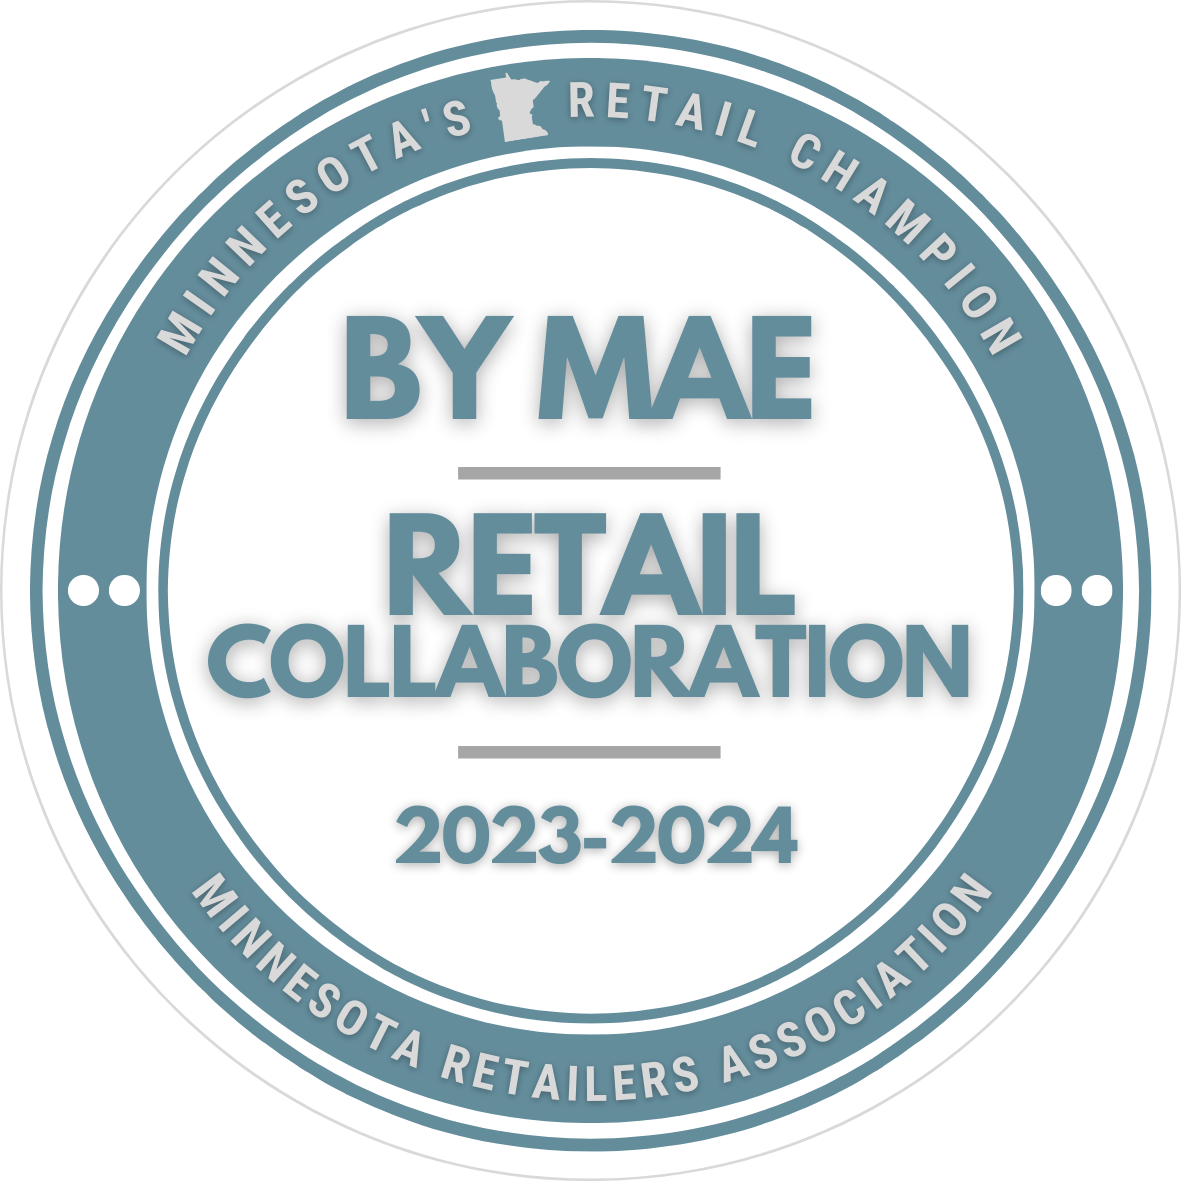 By Mae Retail Collaboration